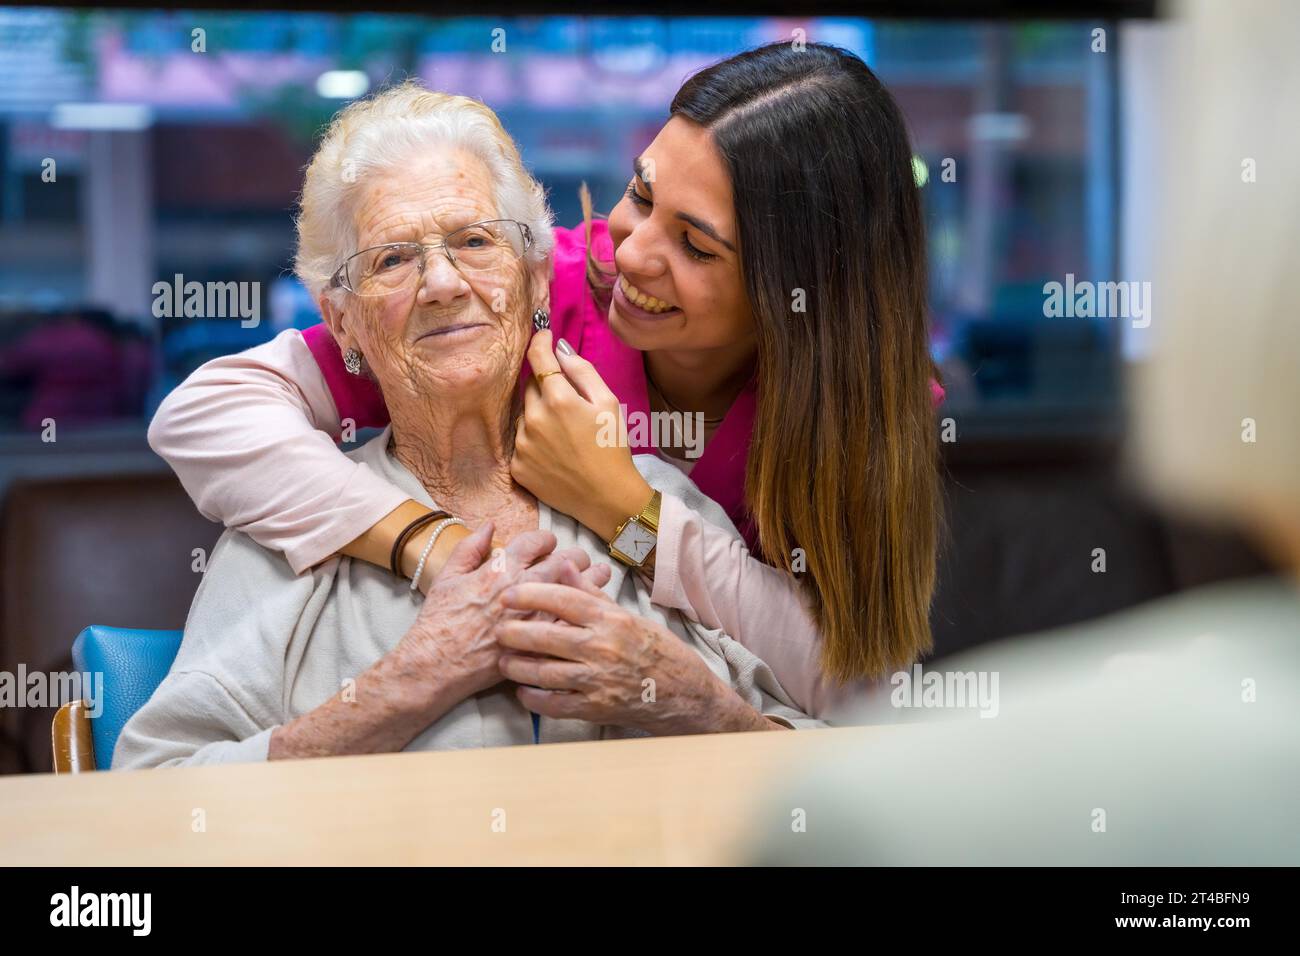 Tender moment of a happy nurse caressing and embracing an old woman in a geriatric Stock Photo